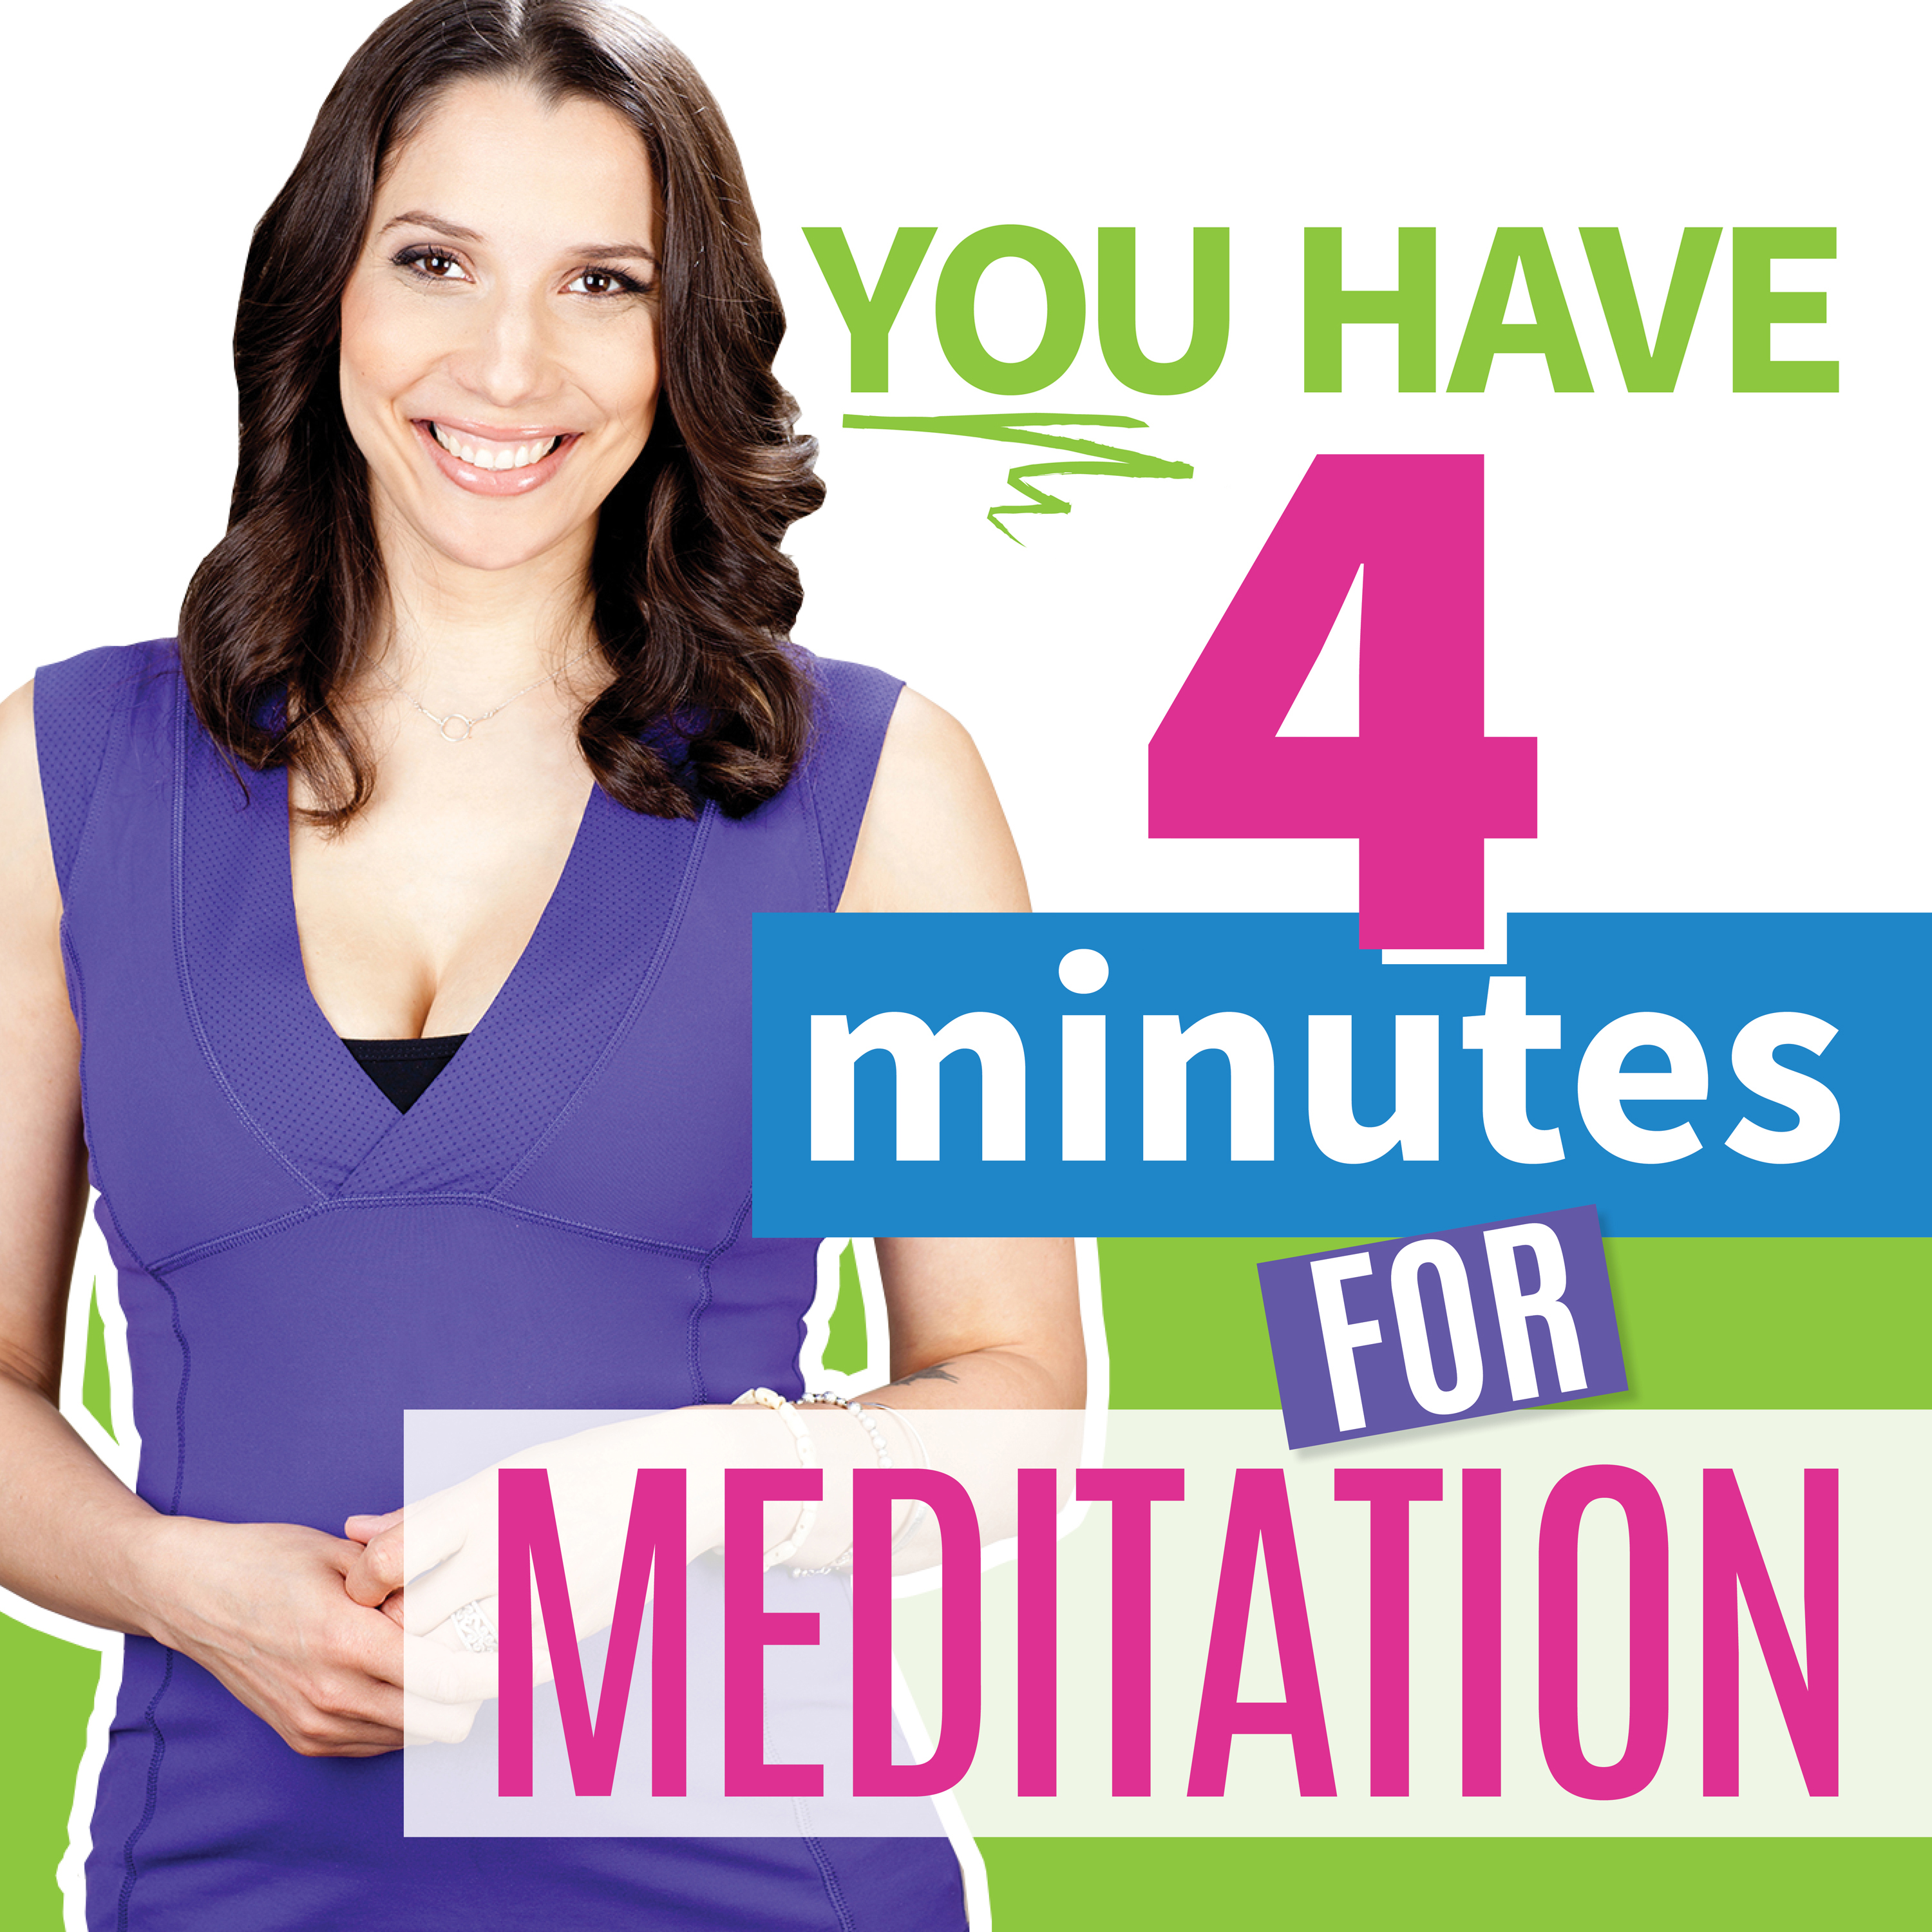 Relieve stress, manage anxiety, ease depression, and create a life you love in just a few quiet minutes a day with these short, easy-to-follow guided meditations for beginners by Rebekah Borucki of BexLife.com and the Blissed In Wellness movement.